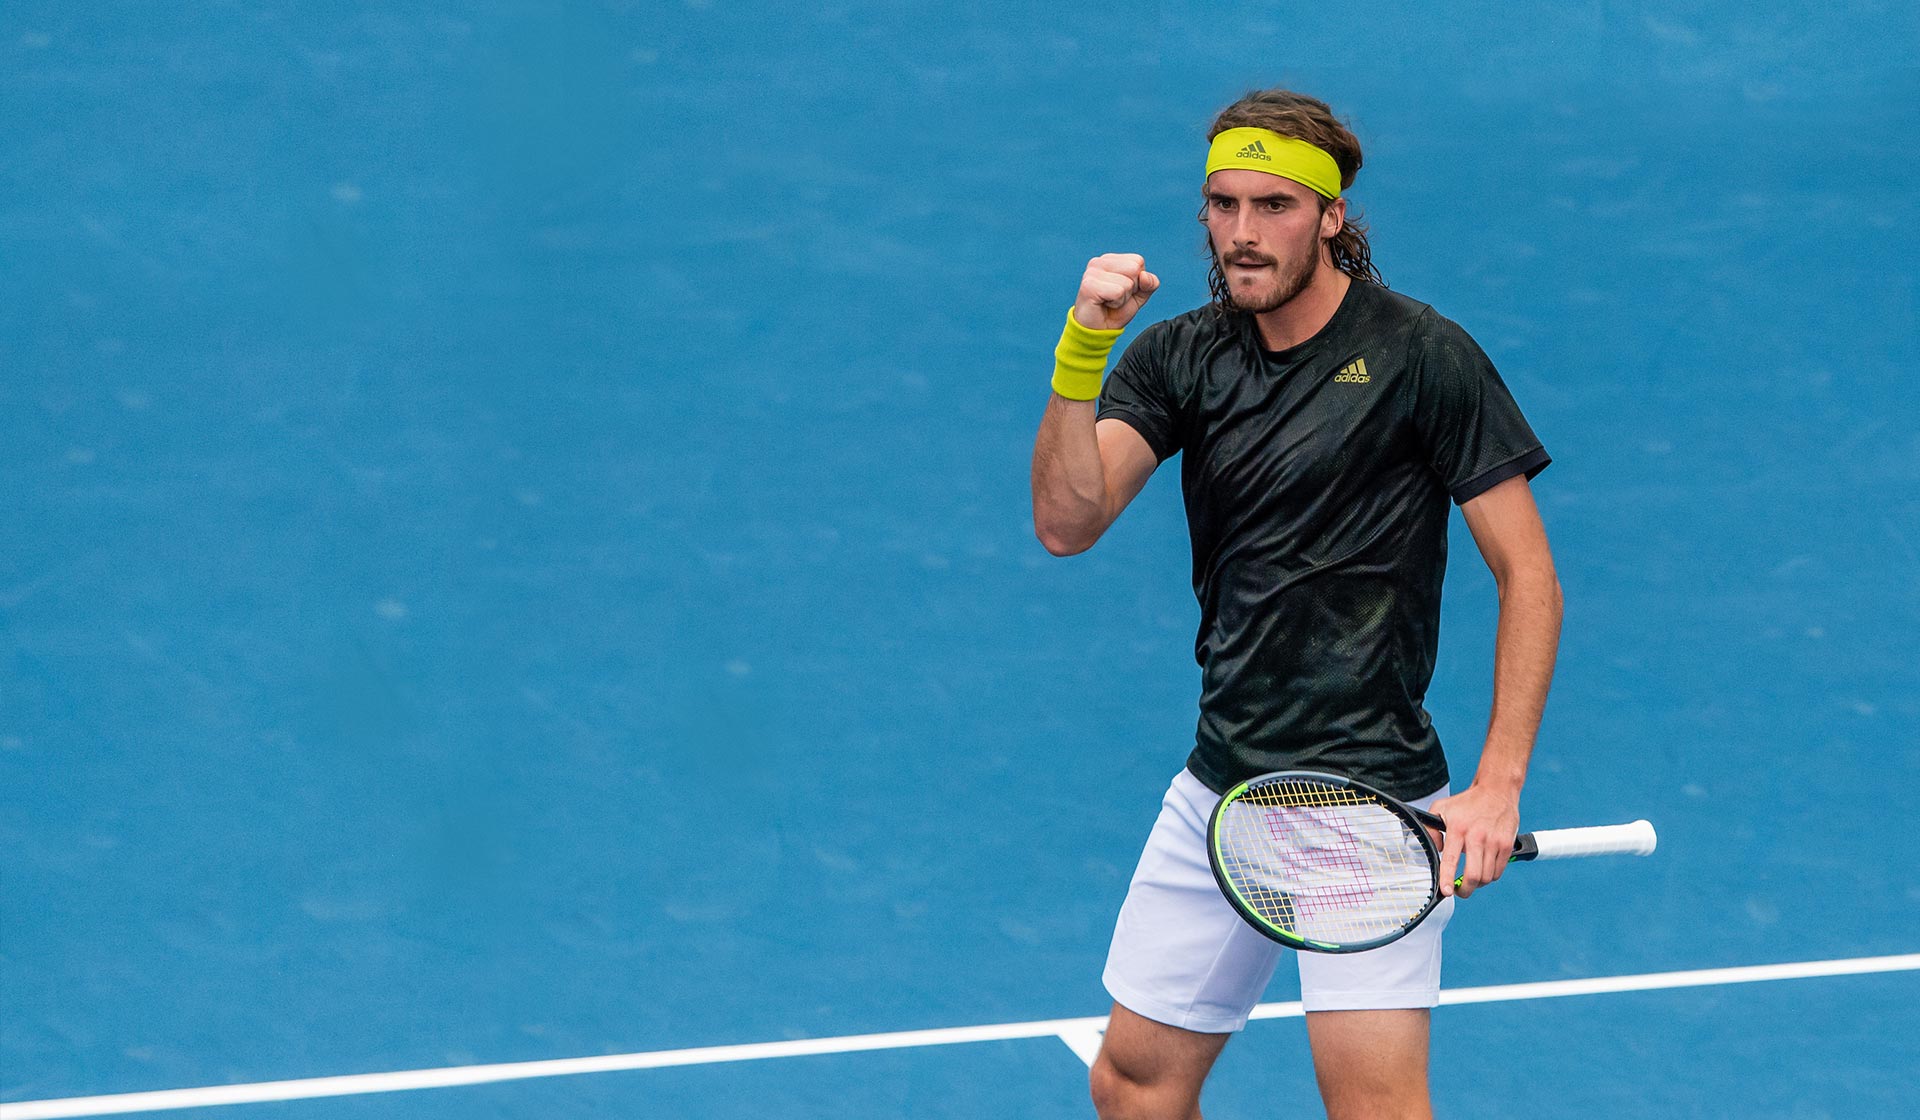 Stefanos Tsitsipas competing at the Miami Open